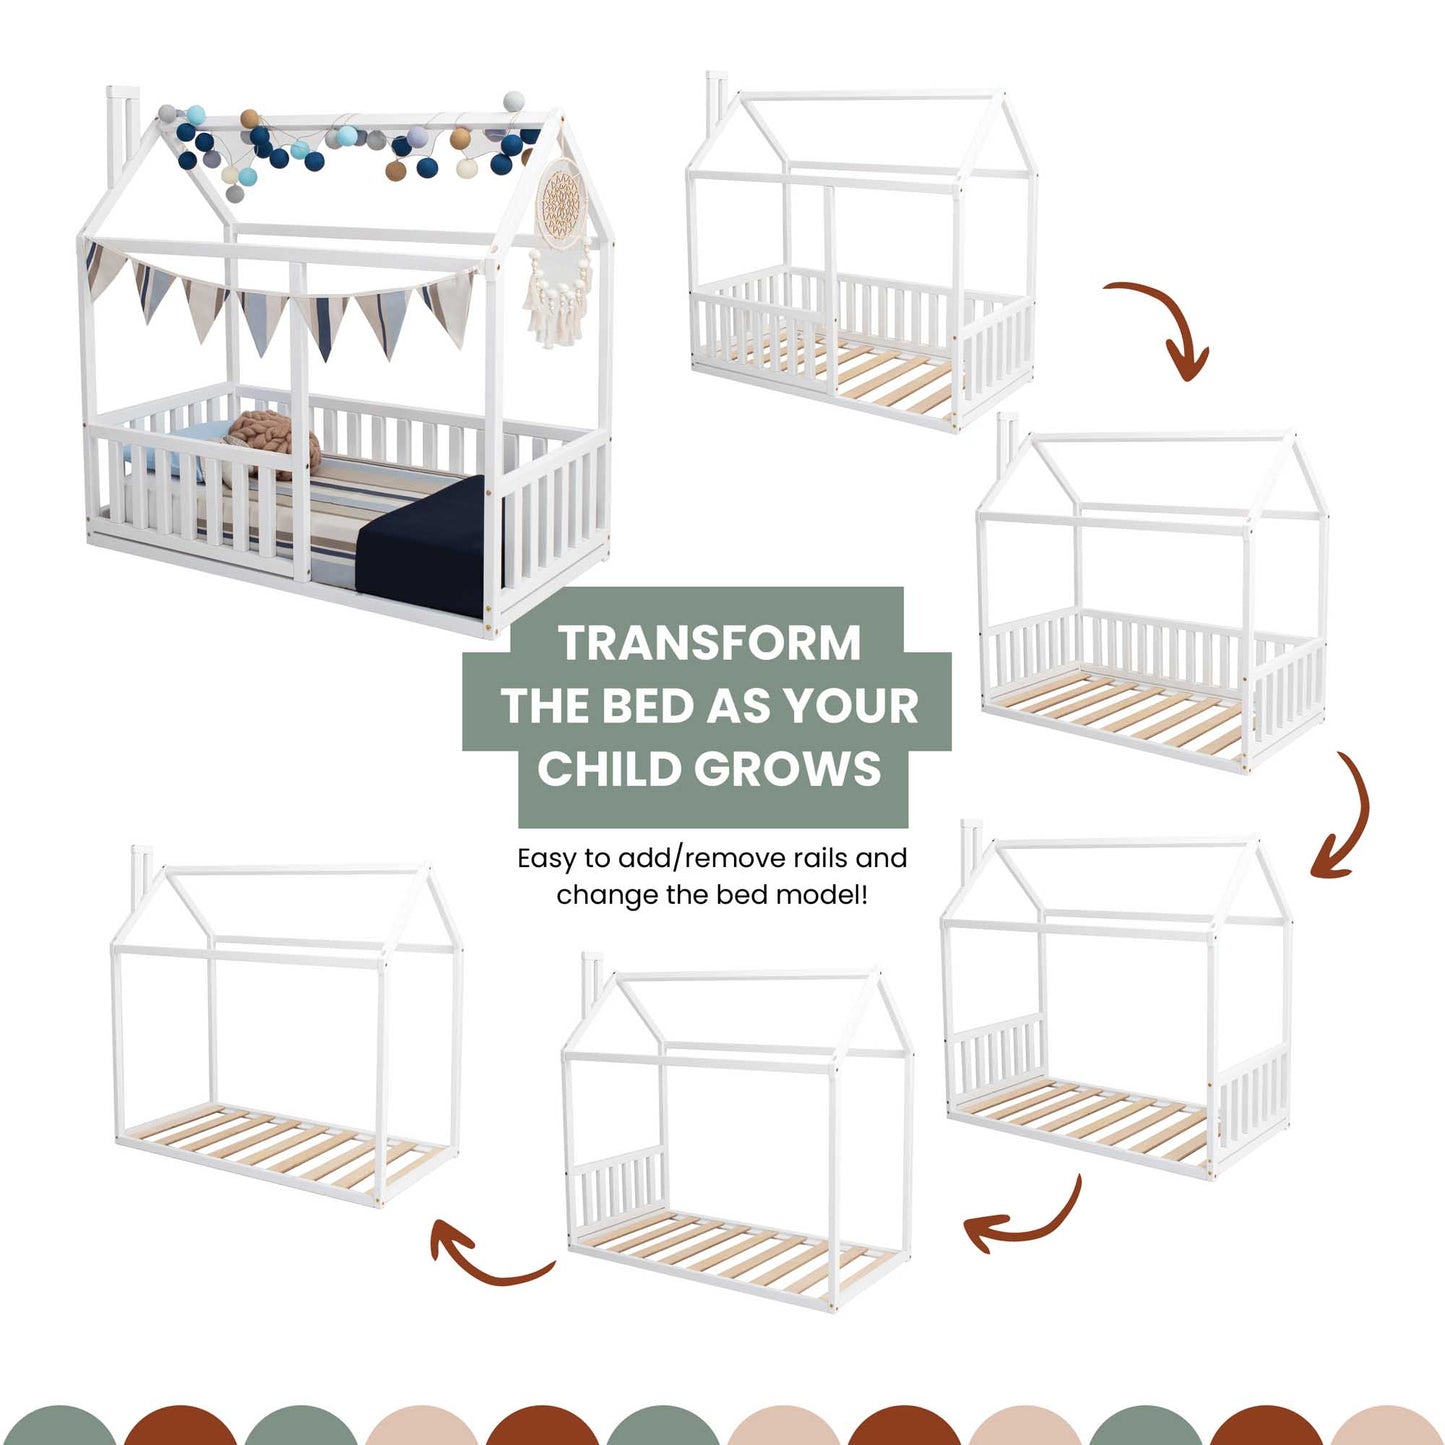 A Montessori floor house bed with rails, designed by Sweet Home From Wood, to transform the bed as your child grows, creating a cozy sleep haven.